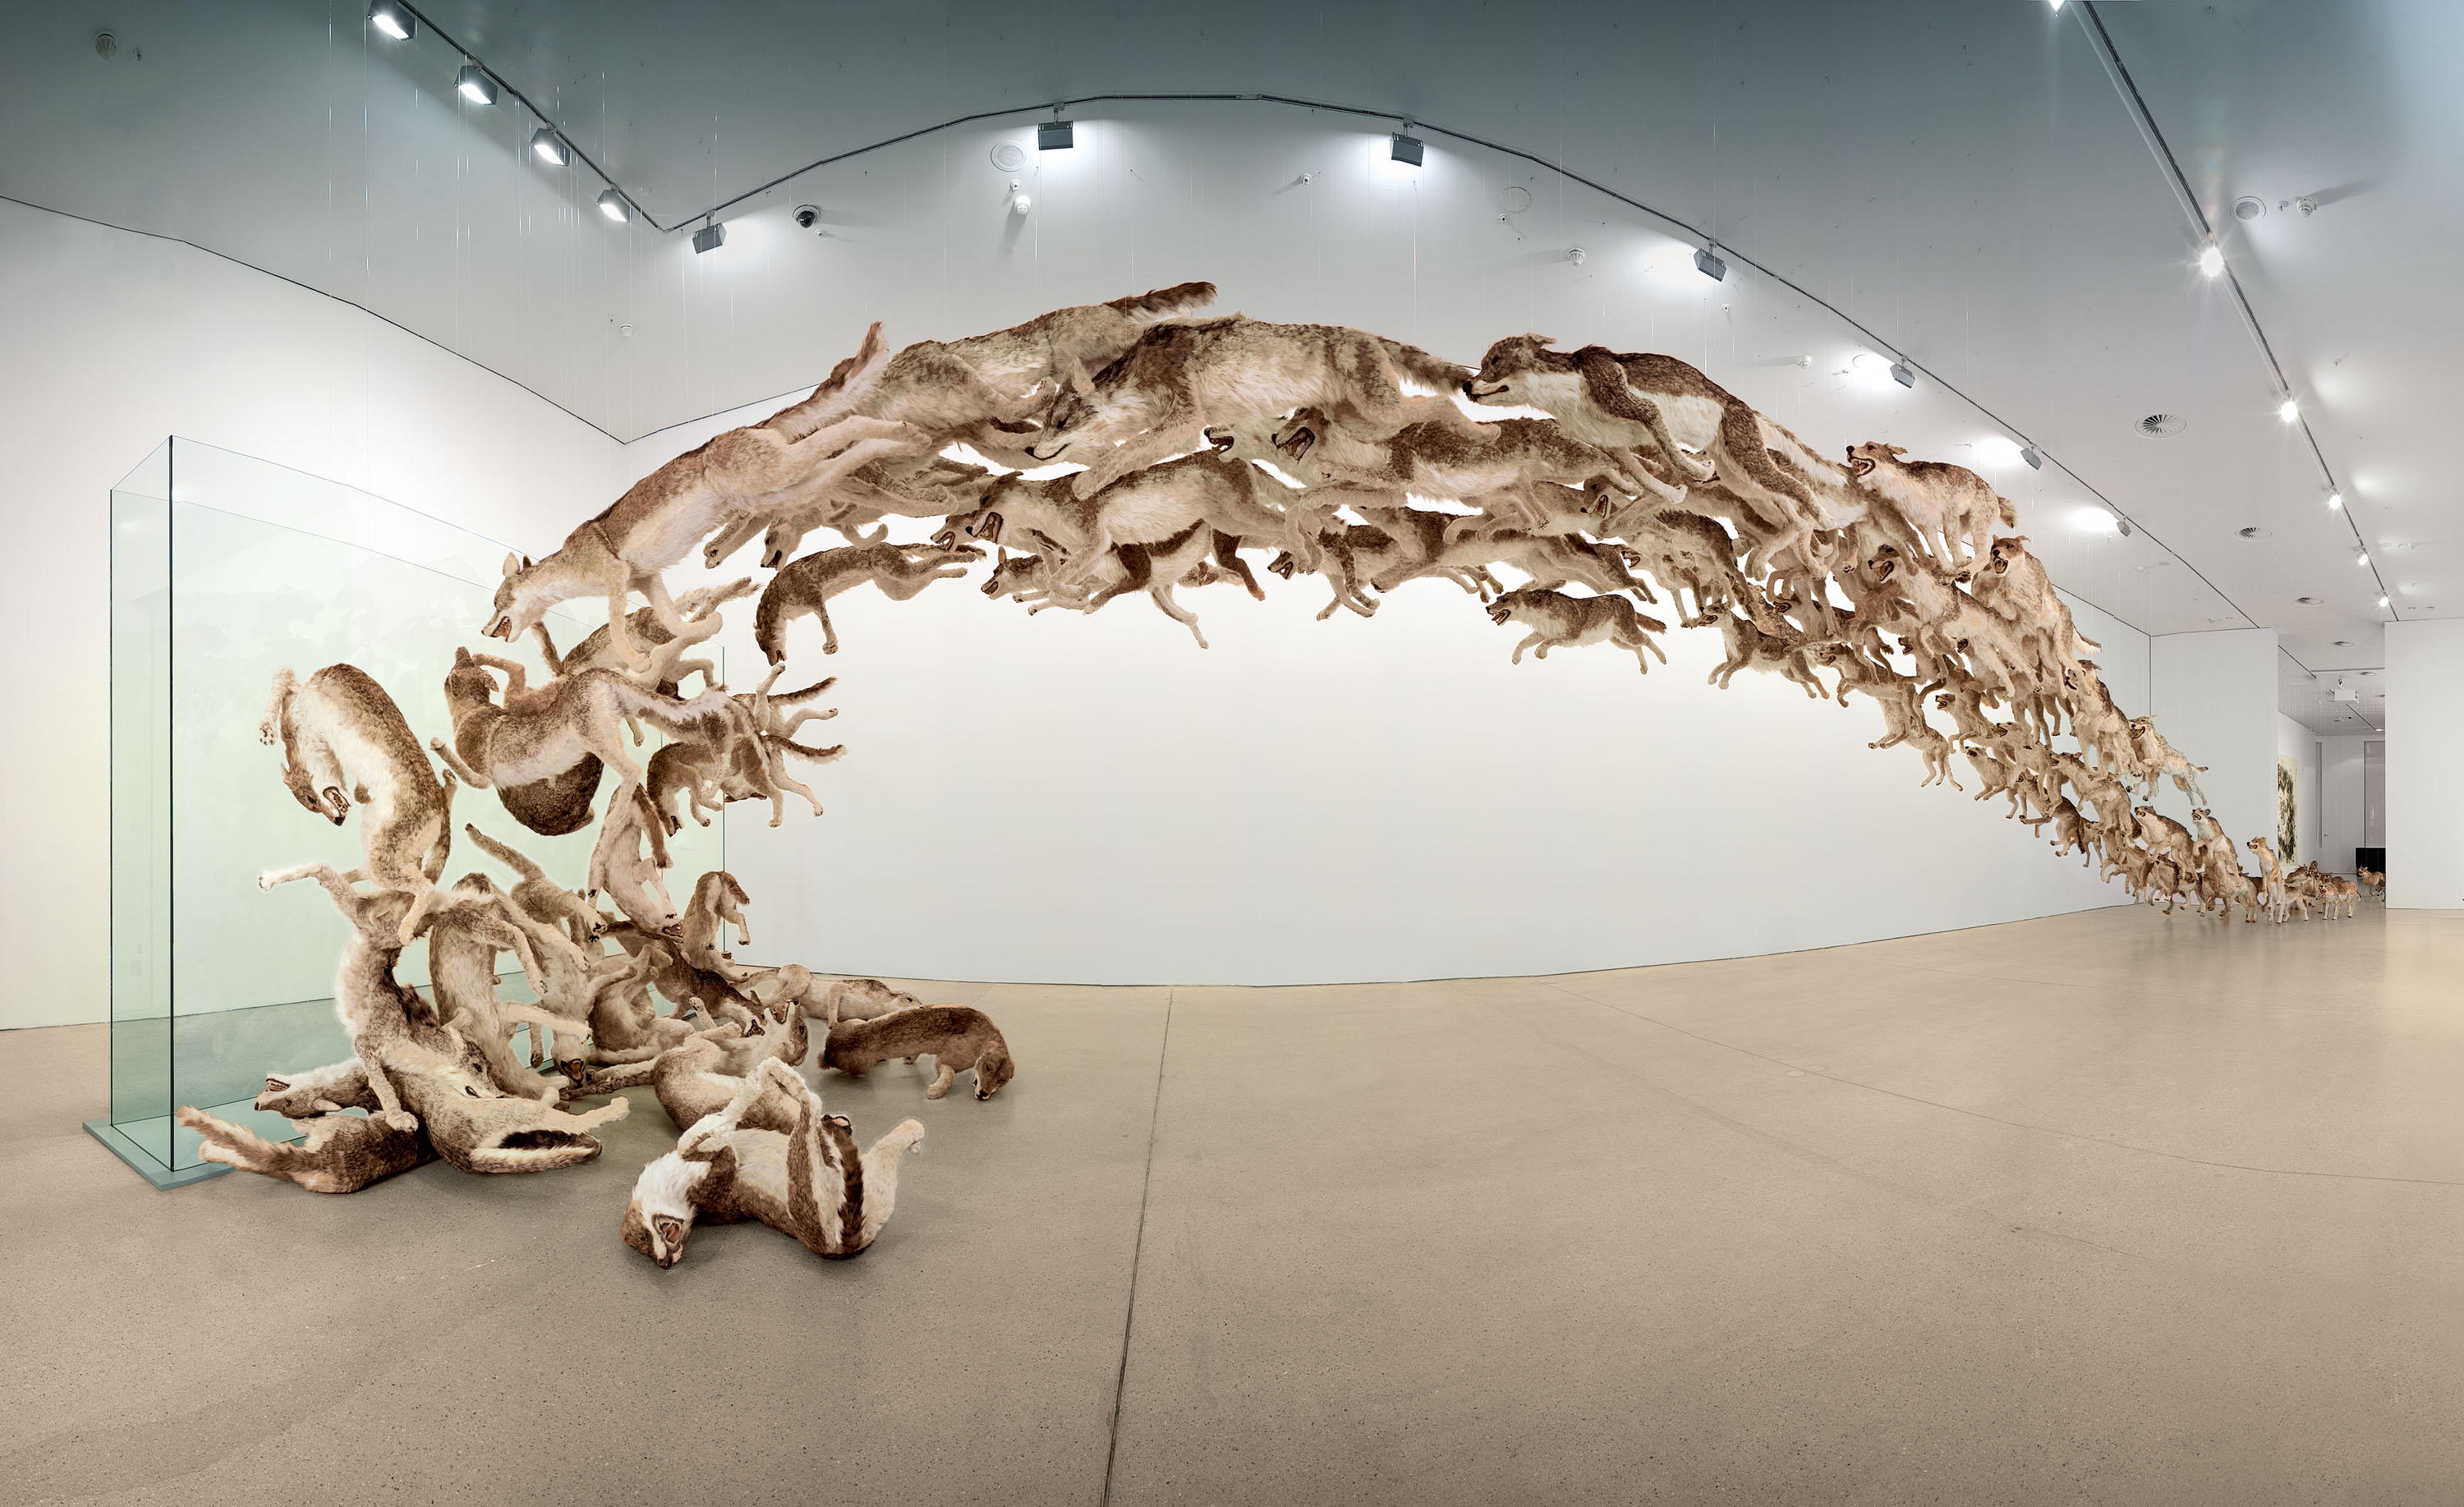 99 lifelike sculptures of wolves running and hitting a glass wall in a gallery space